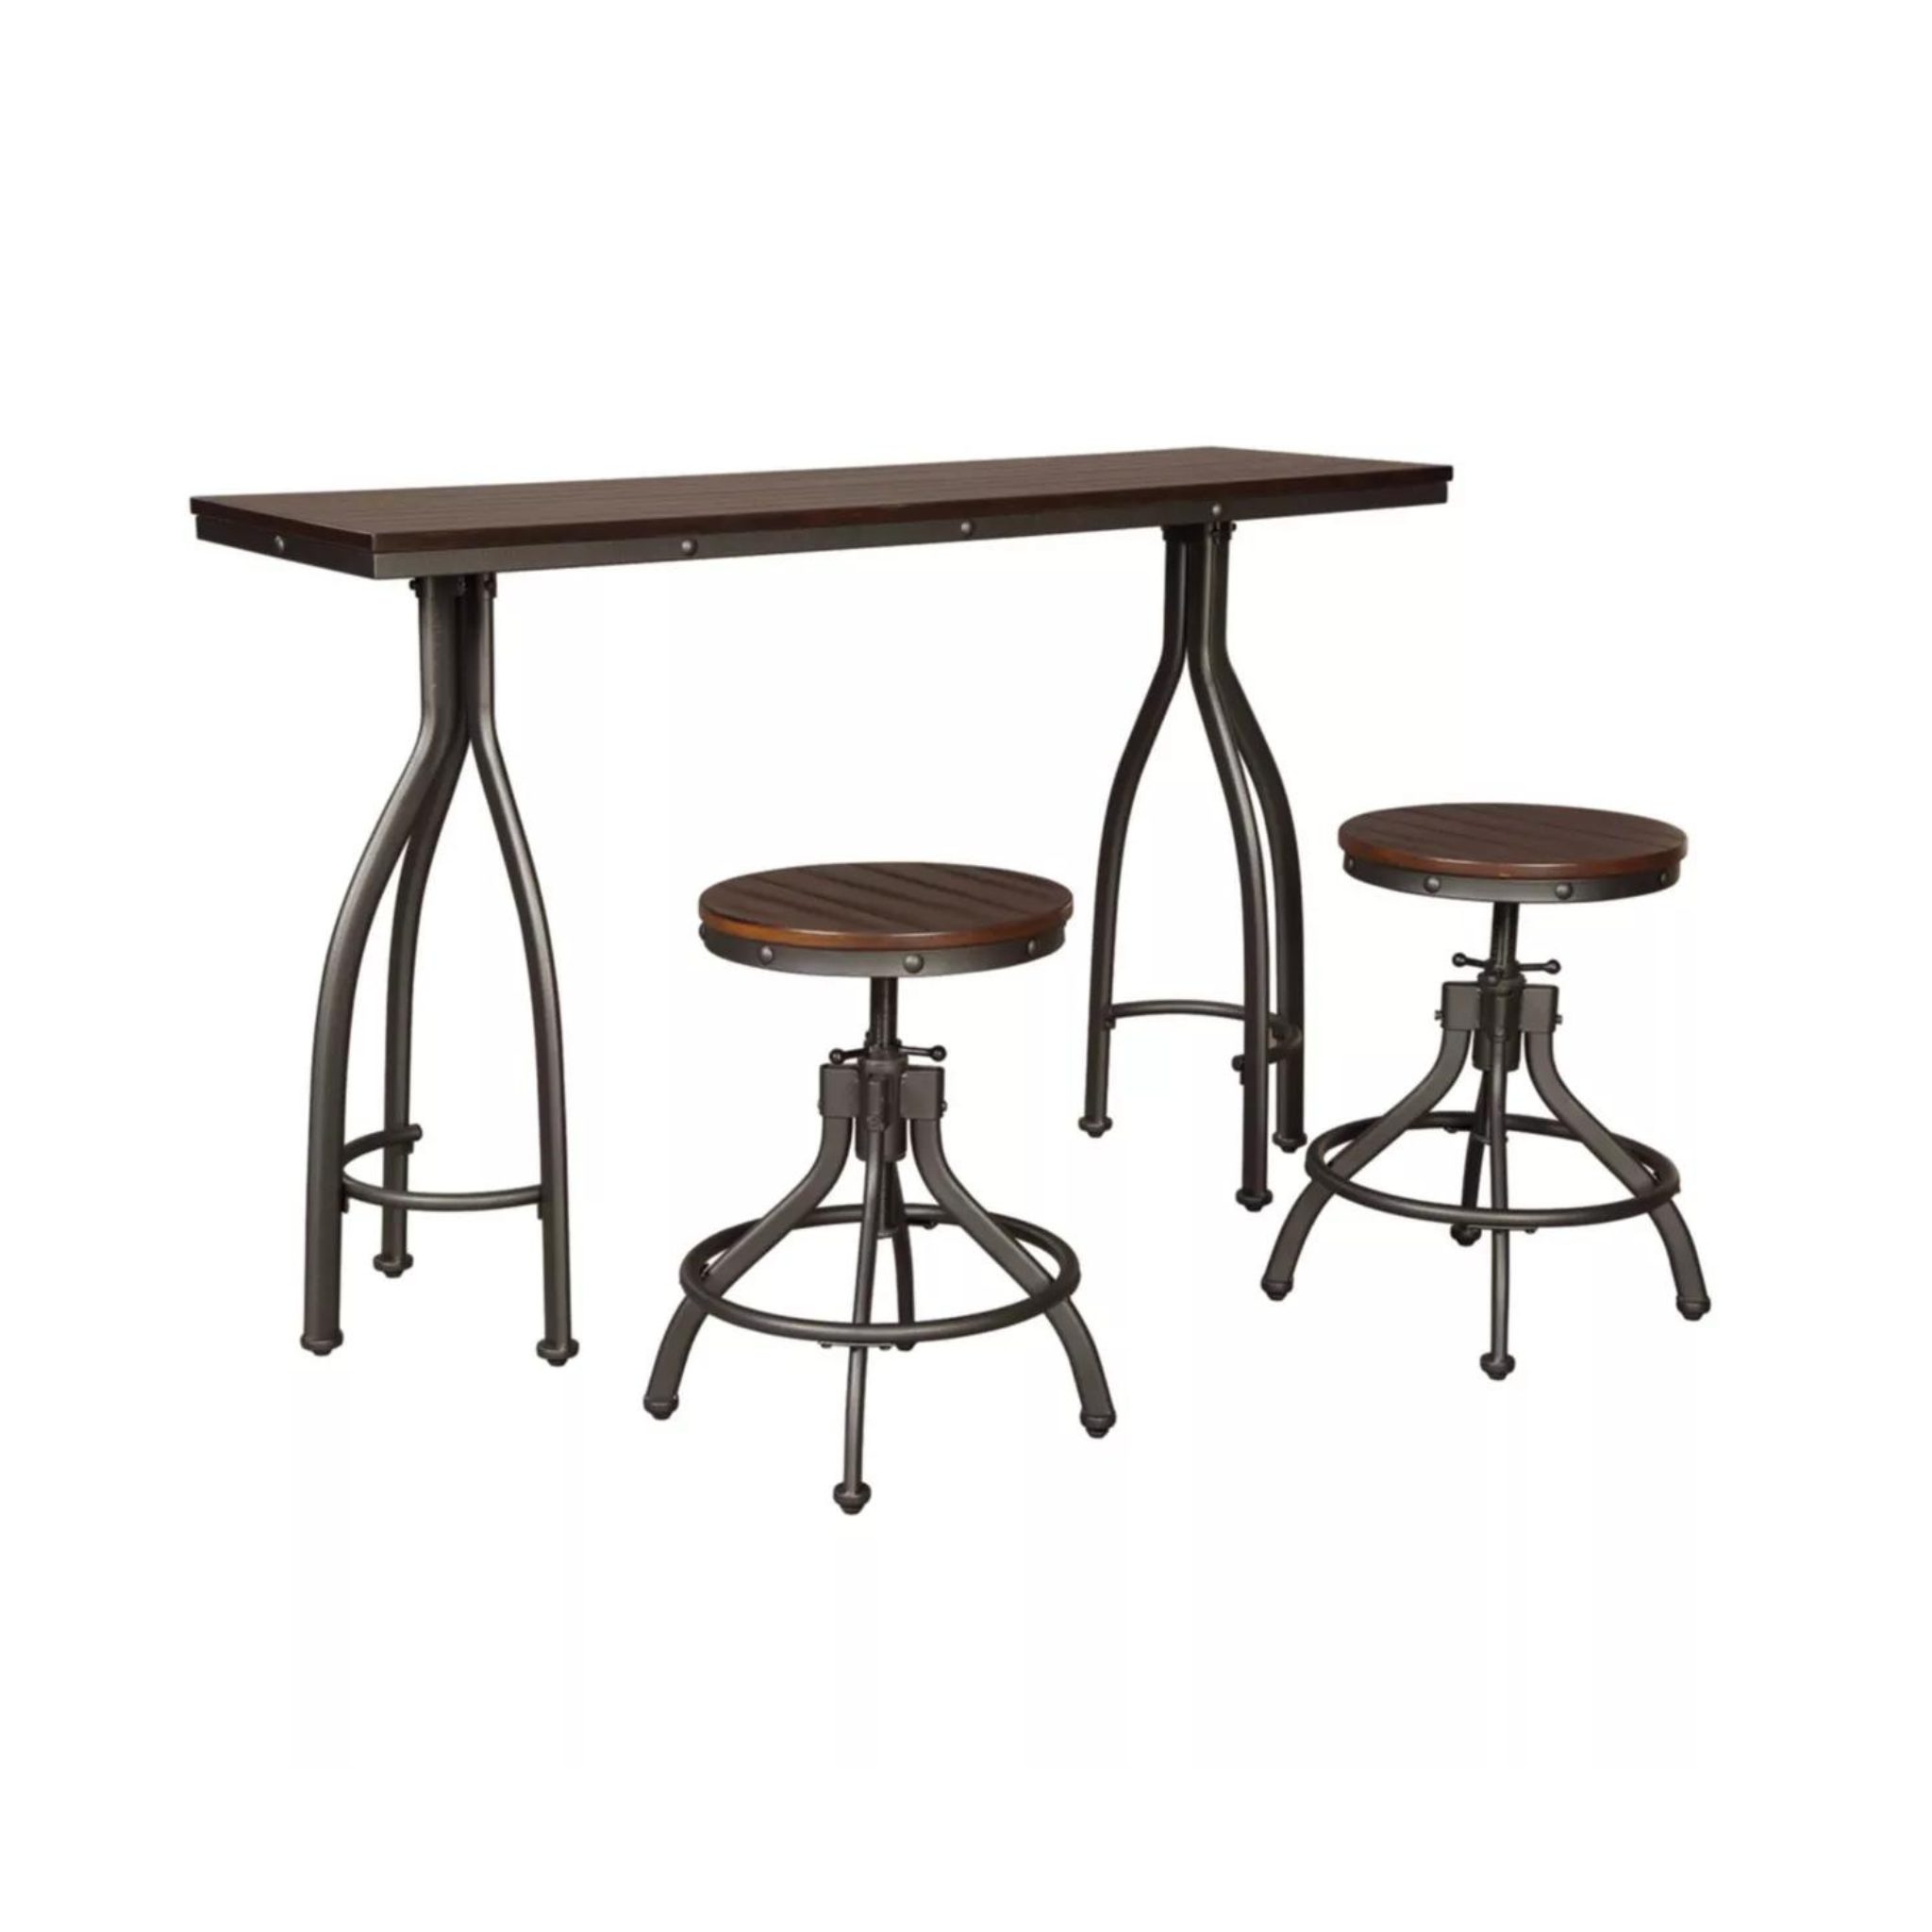 Signature Design by Ashley Odium Dining Table With 2 Stools